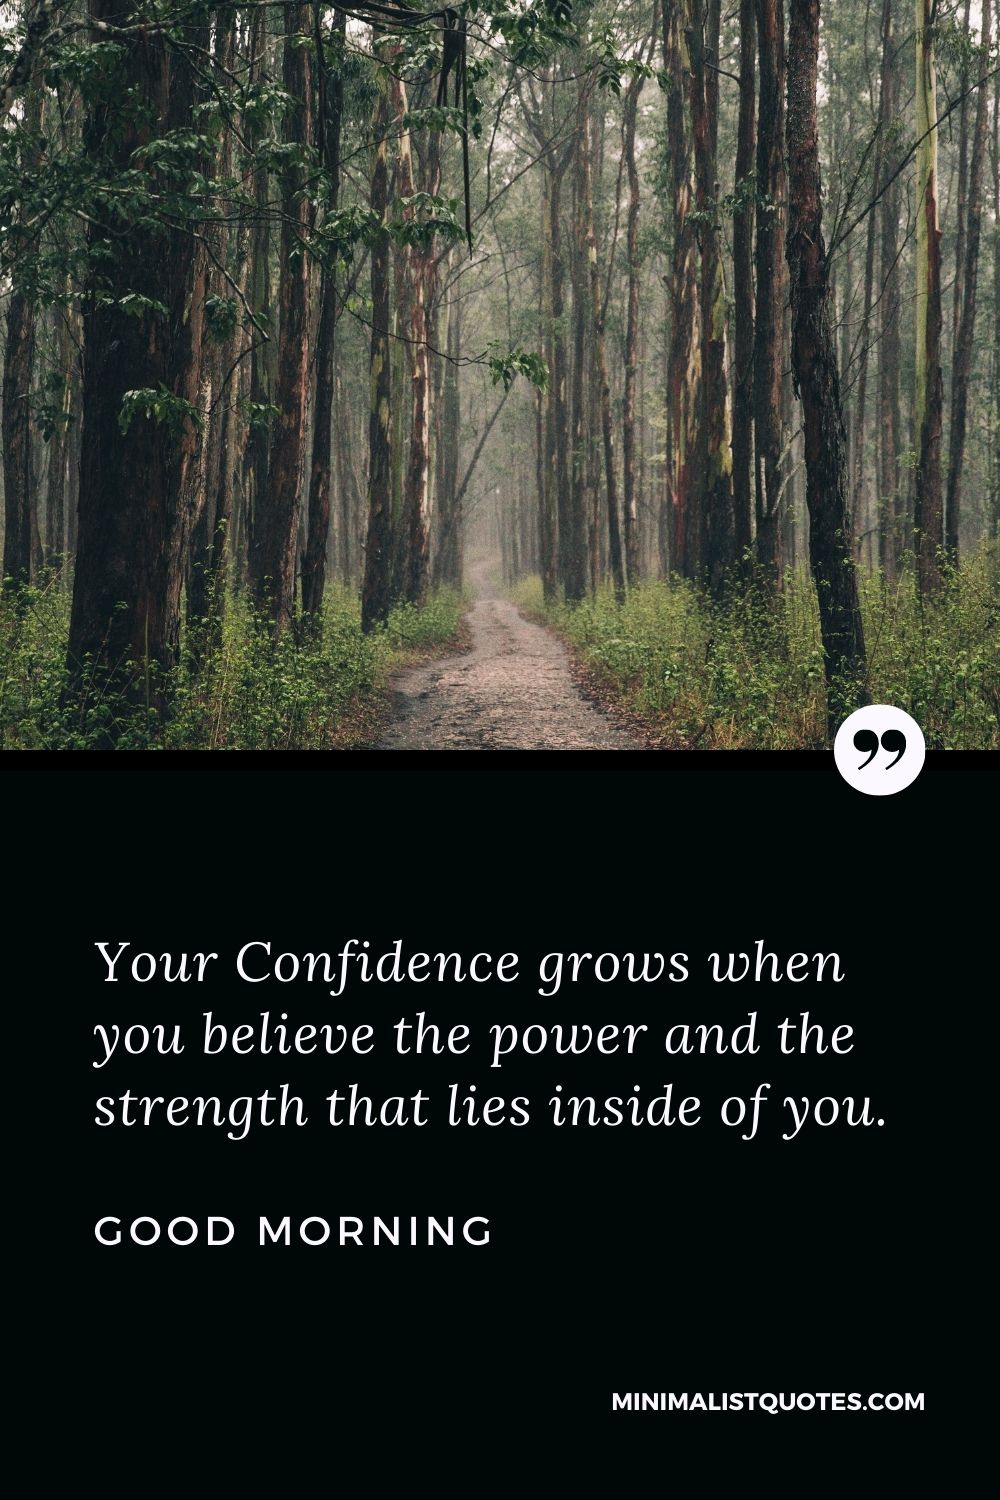 Good Morning Wish & Message With Image: Your Confidence grows when you believe the power and the strength that lies inside of you.